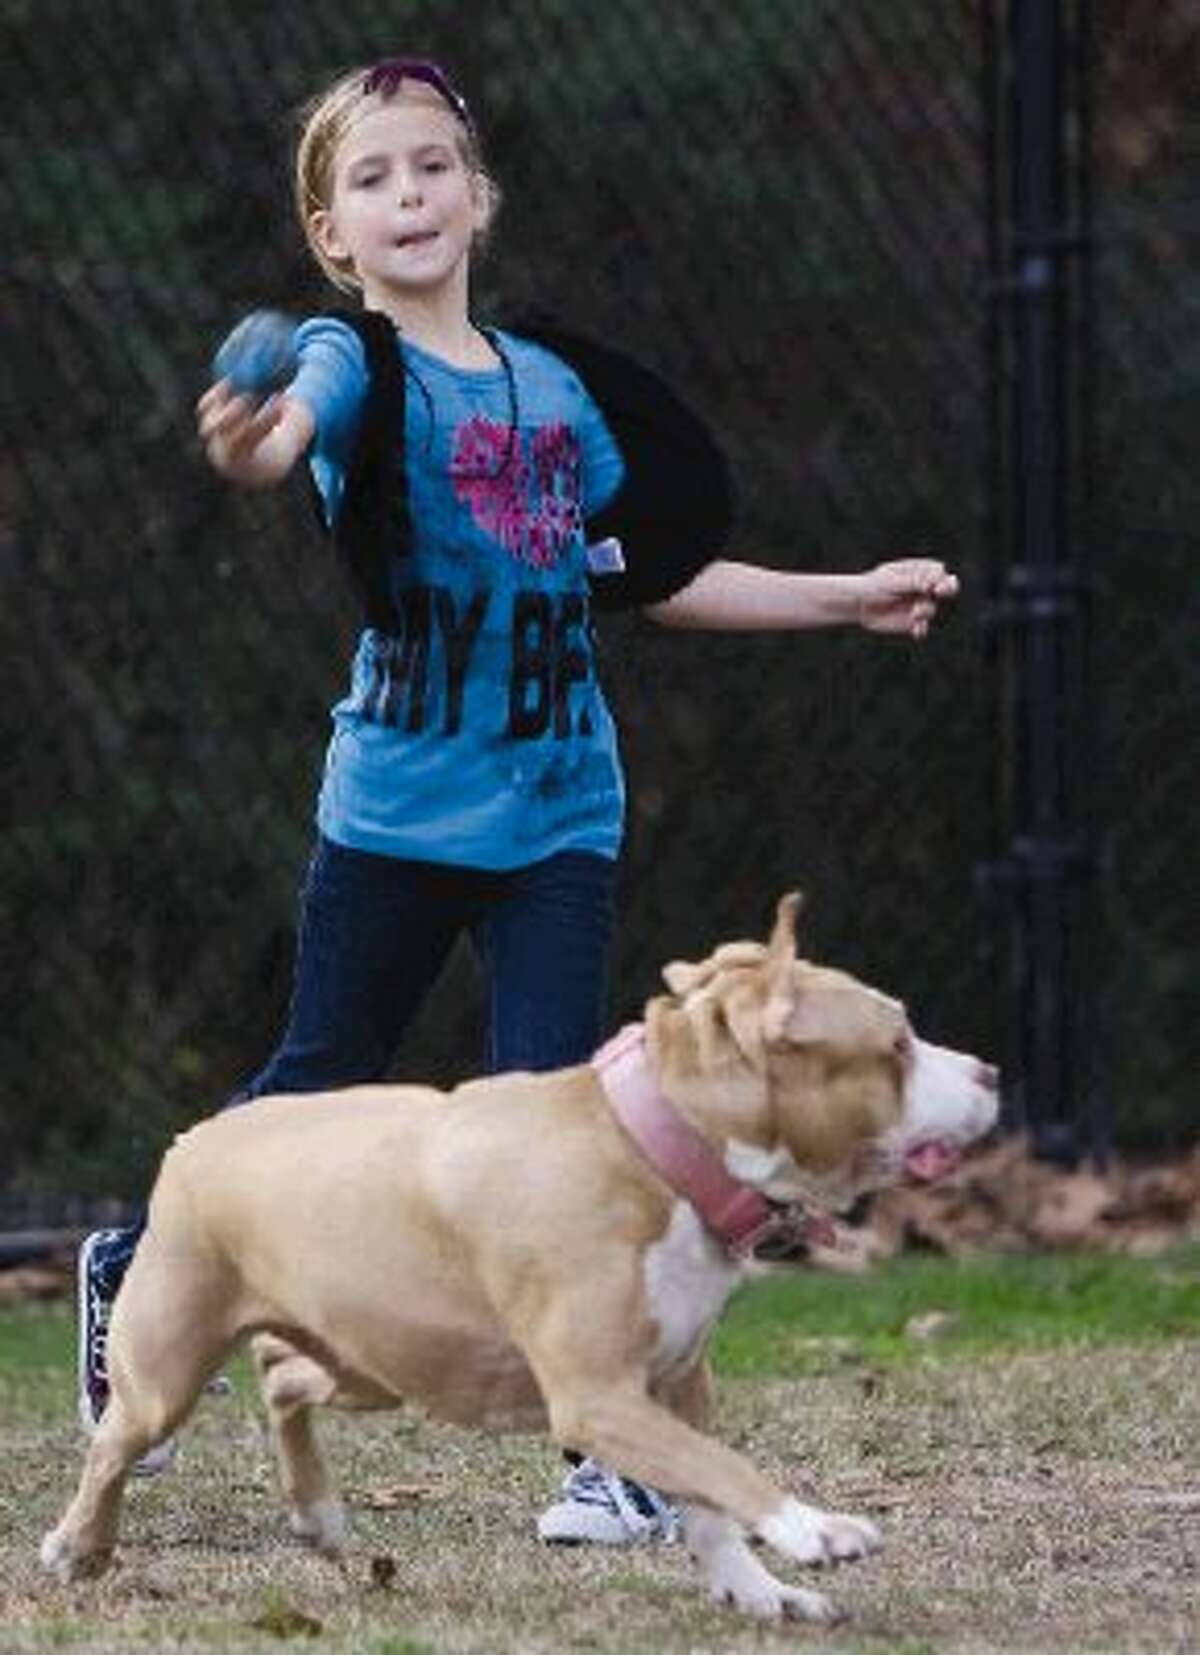 Hayden Ogden, 8, plays with Lady, a pit bull, at a park in The Woodlands on Tuesday.